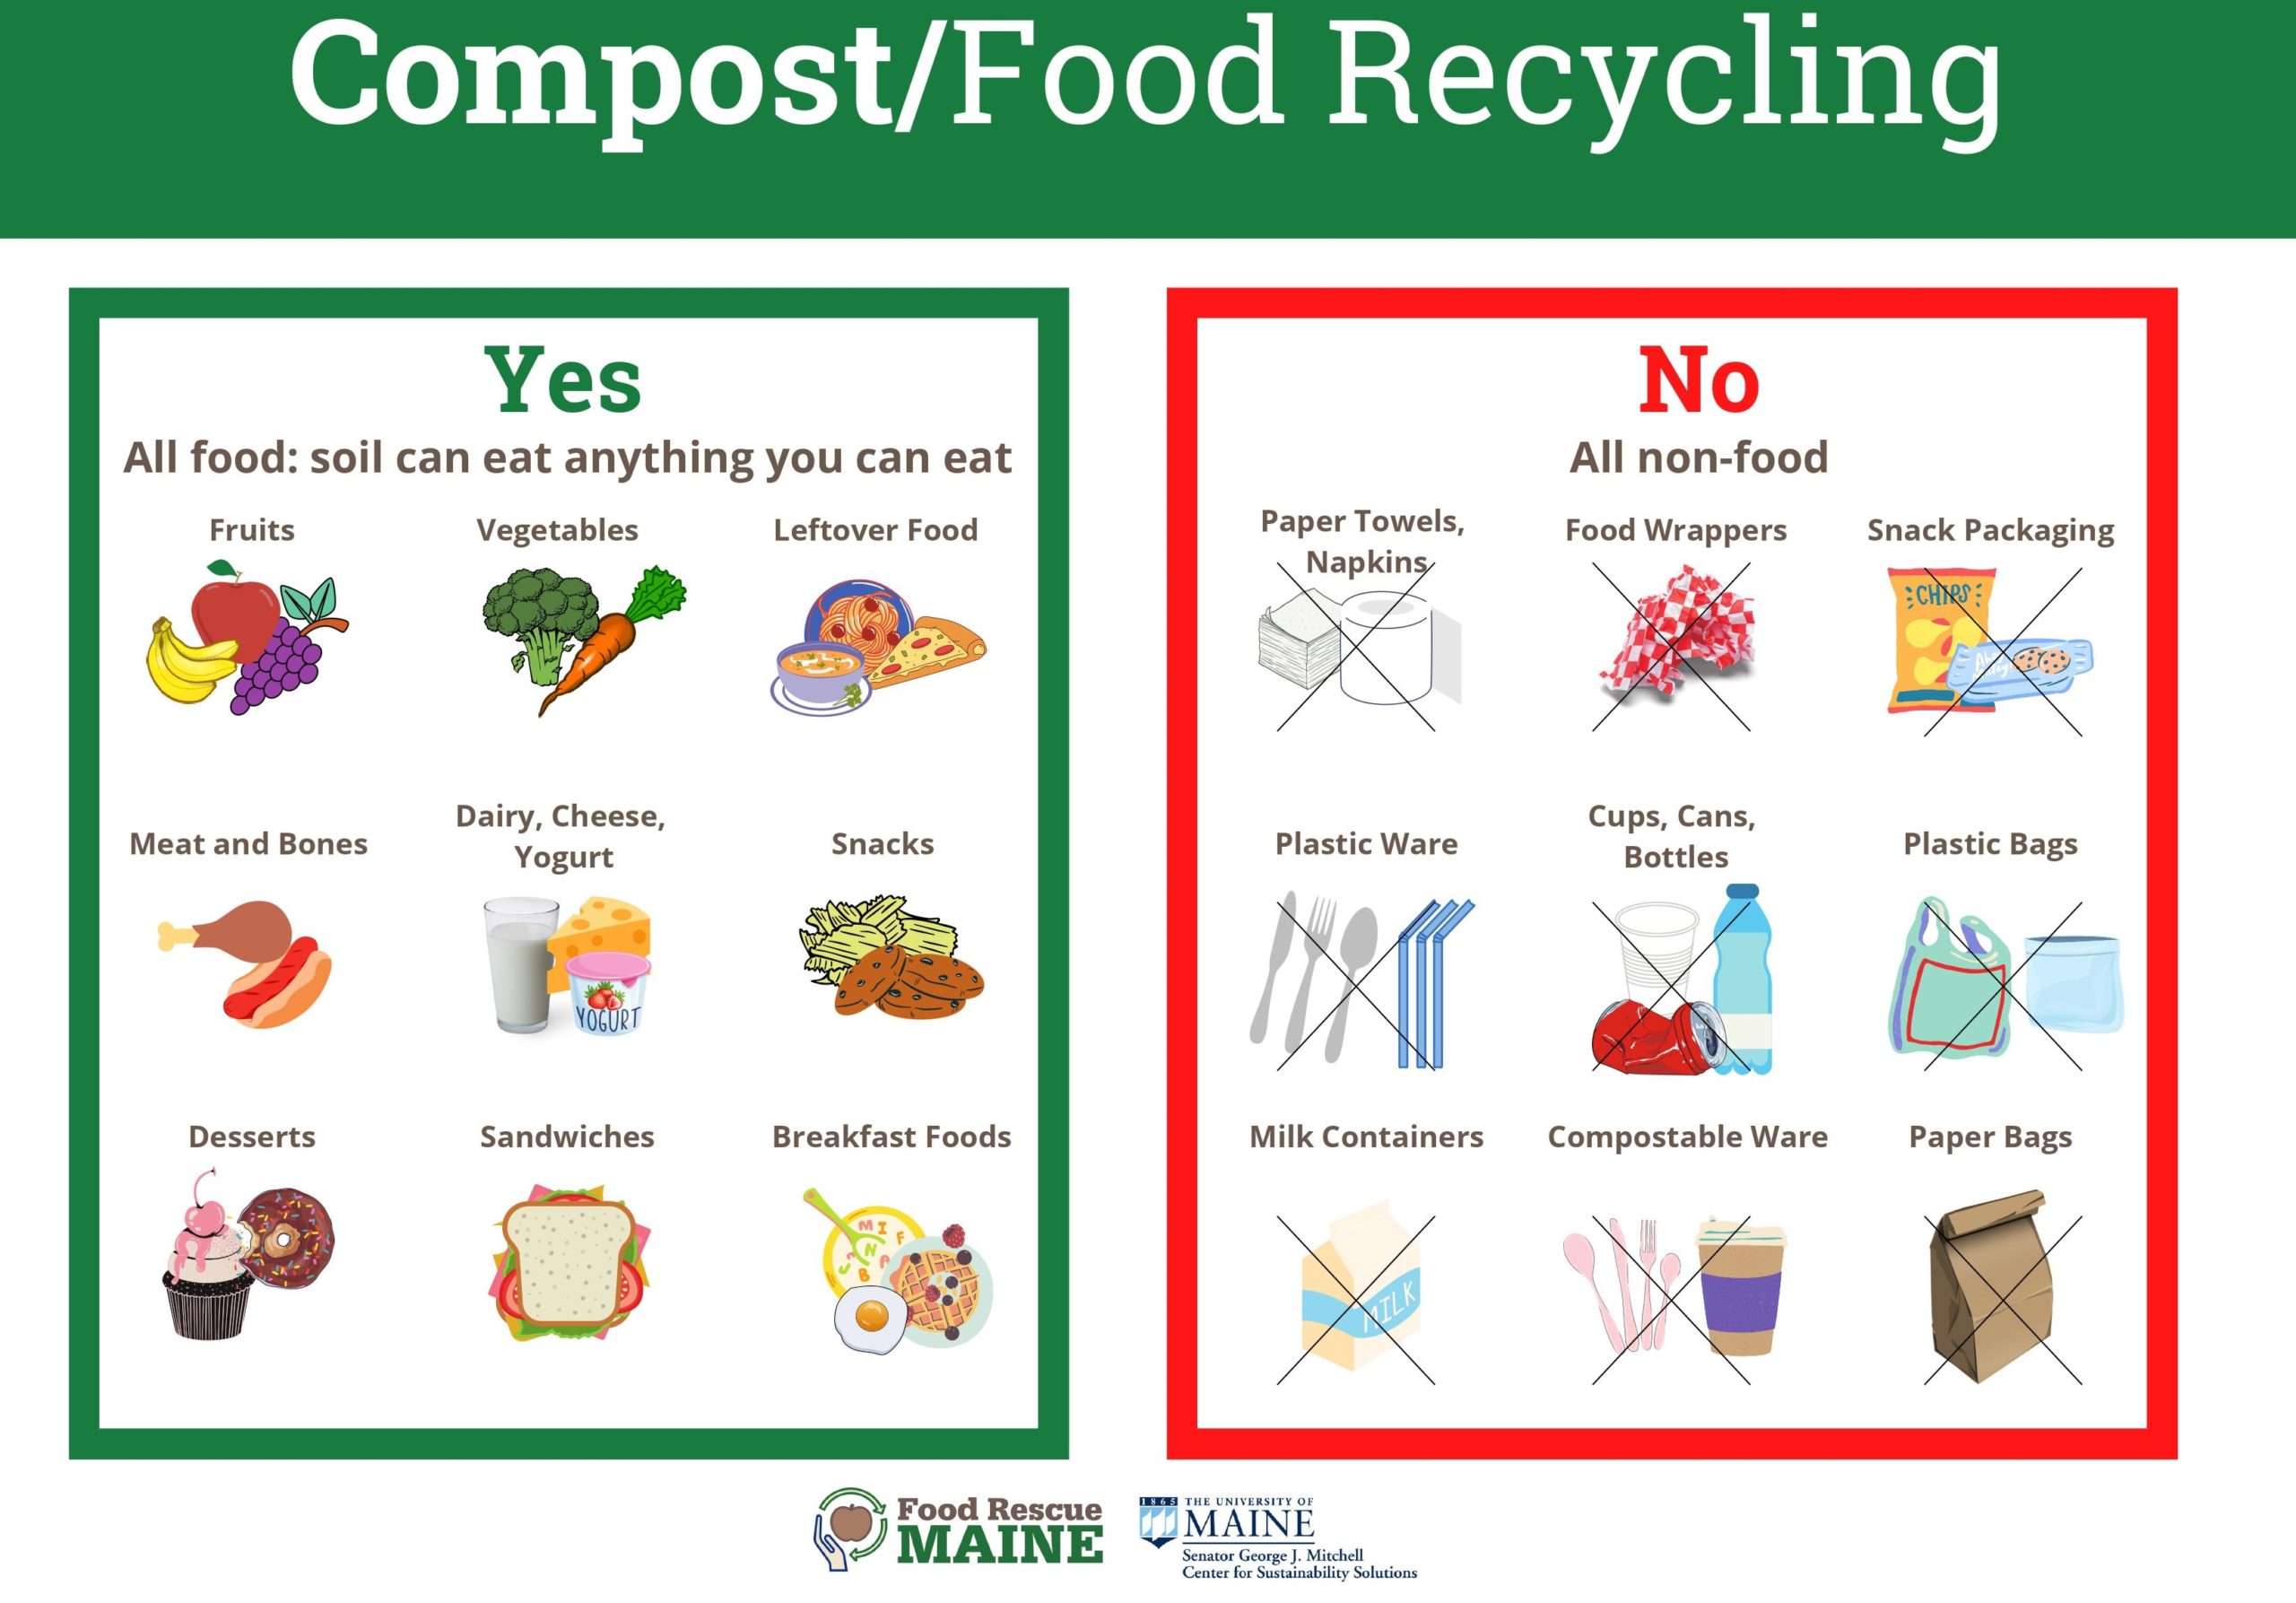 How to compost takeout containers - paper and compostable paper